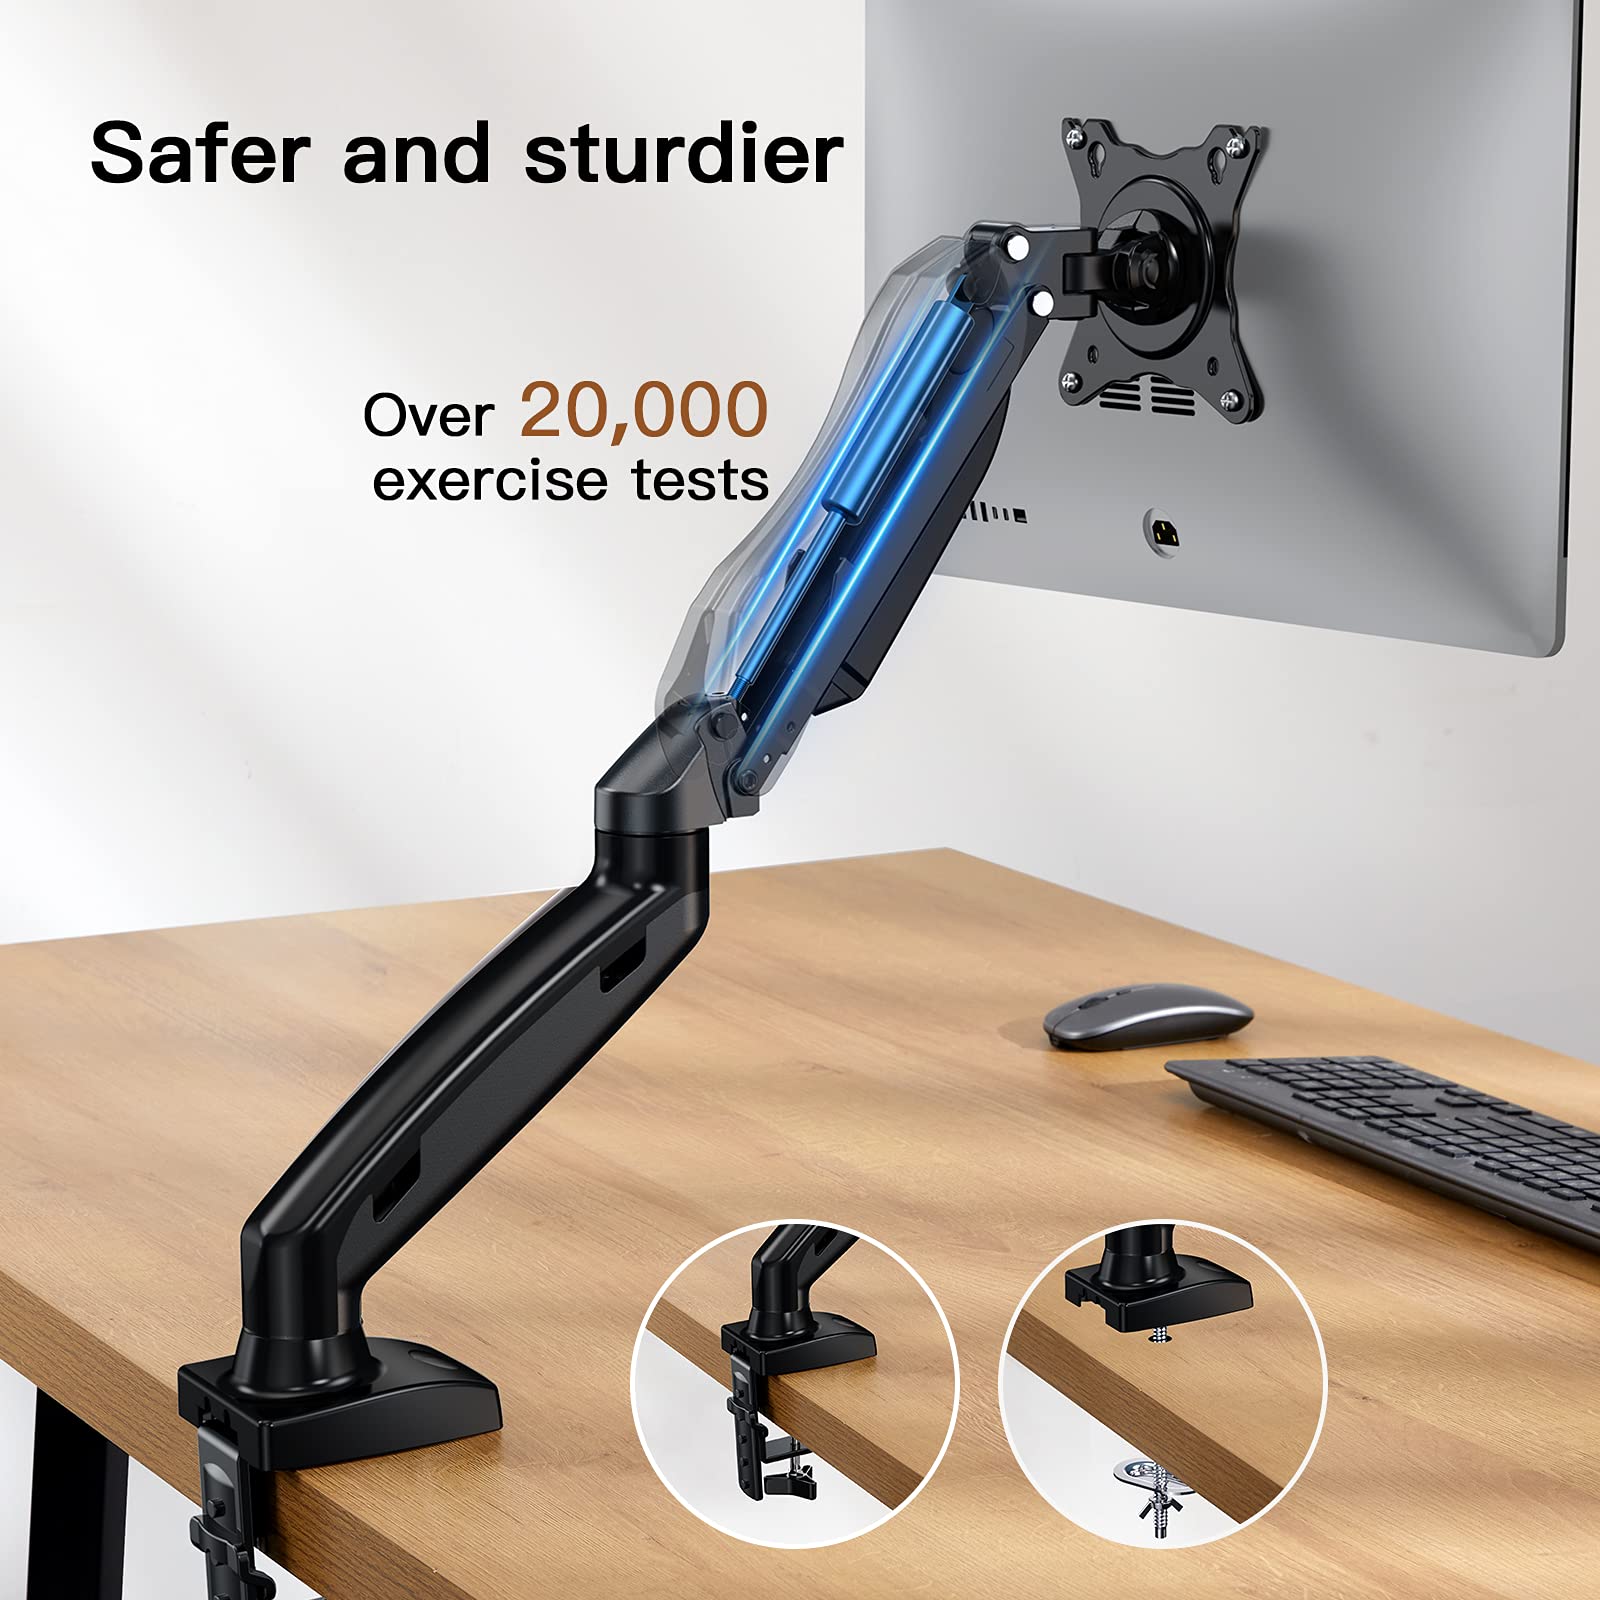 HUANUO Single Monitor Arm for 13 to 30 inch Screen, Gas Spring Monitor Arm, Home Office Monitor Mount, Easy Installation, Adjustable Tilt Swivel Rotate, VESA 75x75 100x100, Weight 6.5KG